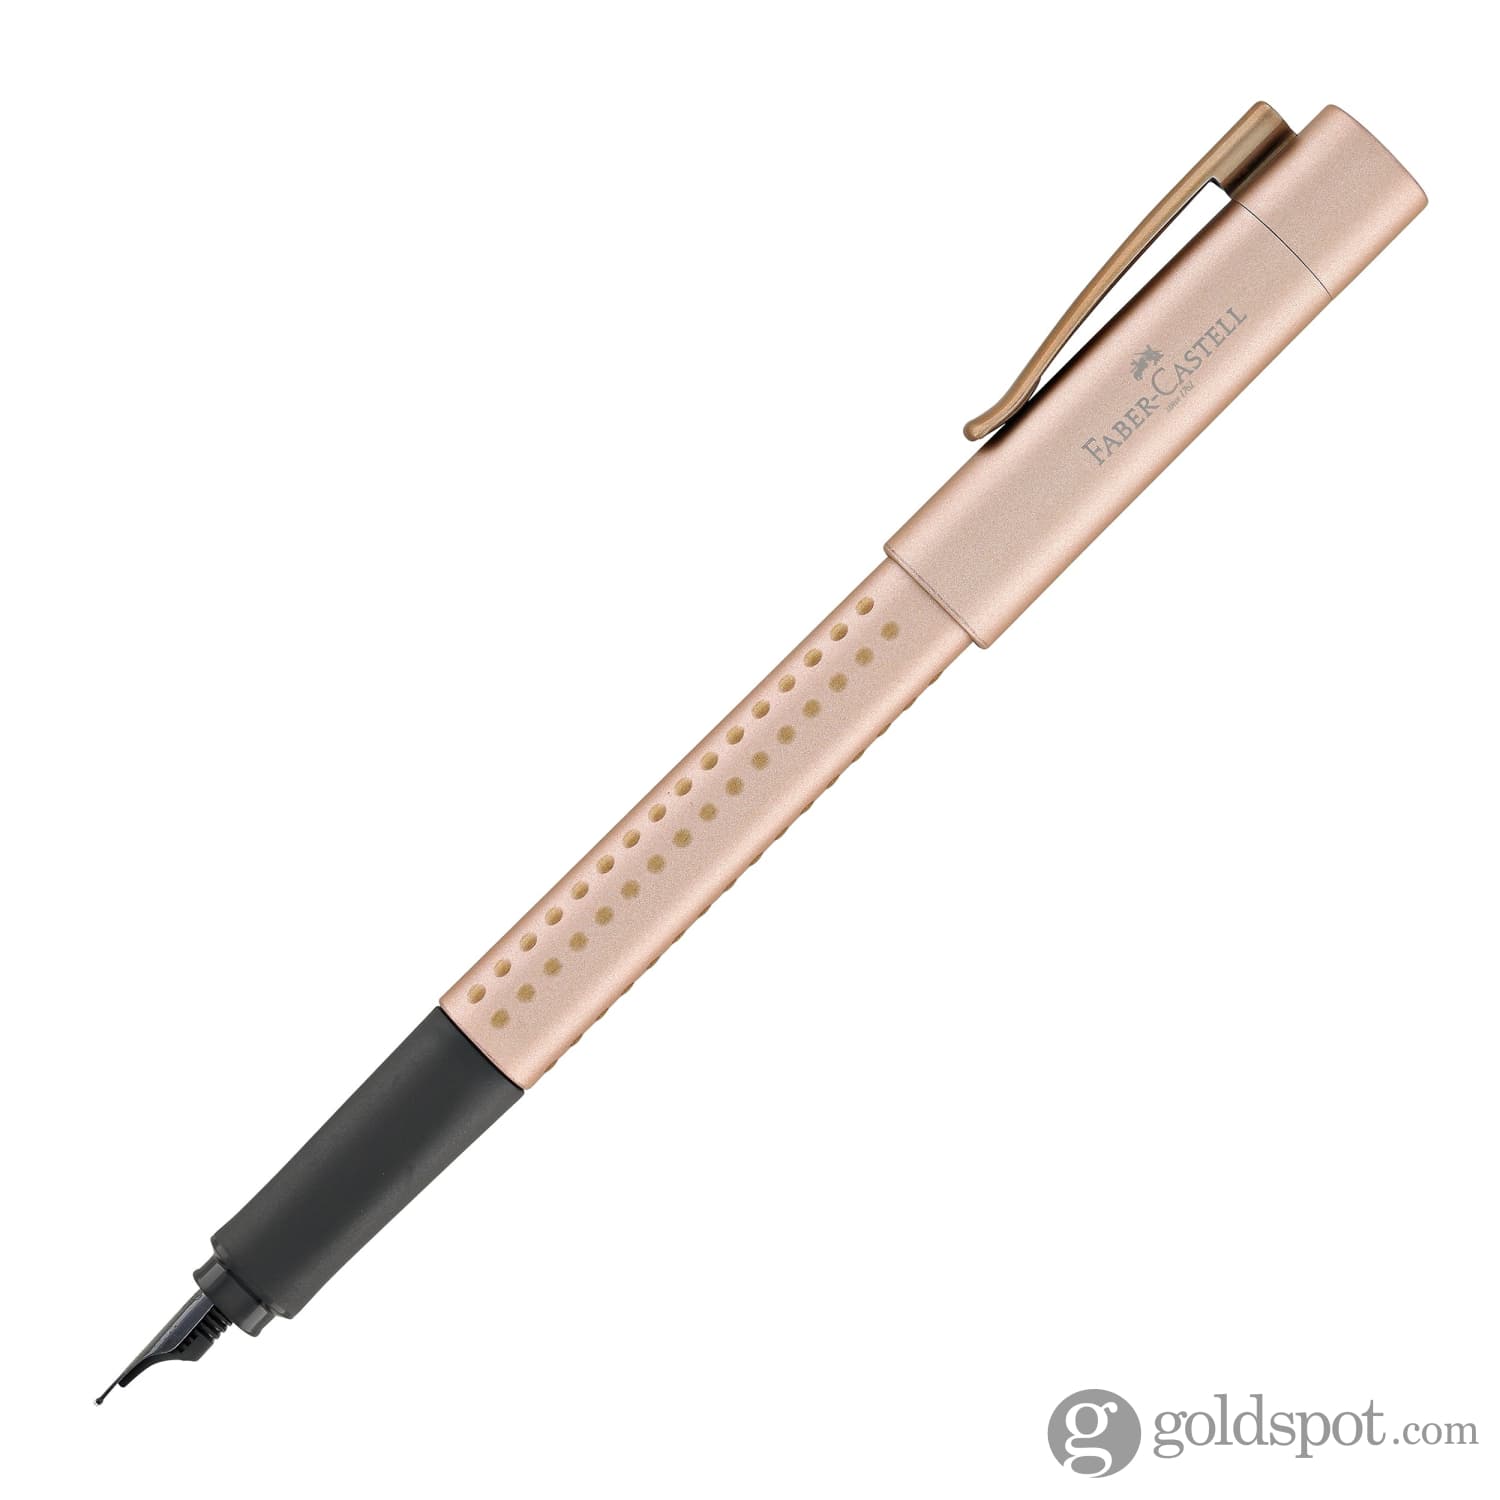 Faber-Castell Grip Edition Fountain Pen - Rose Copper